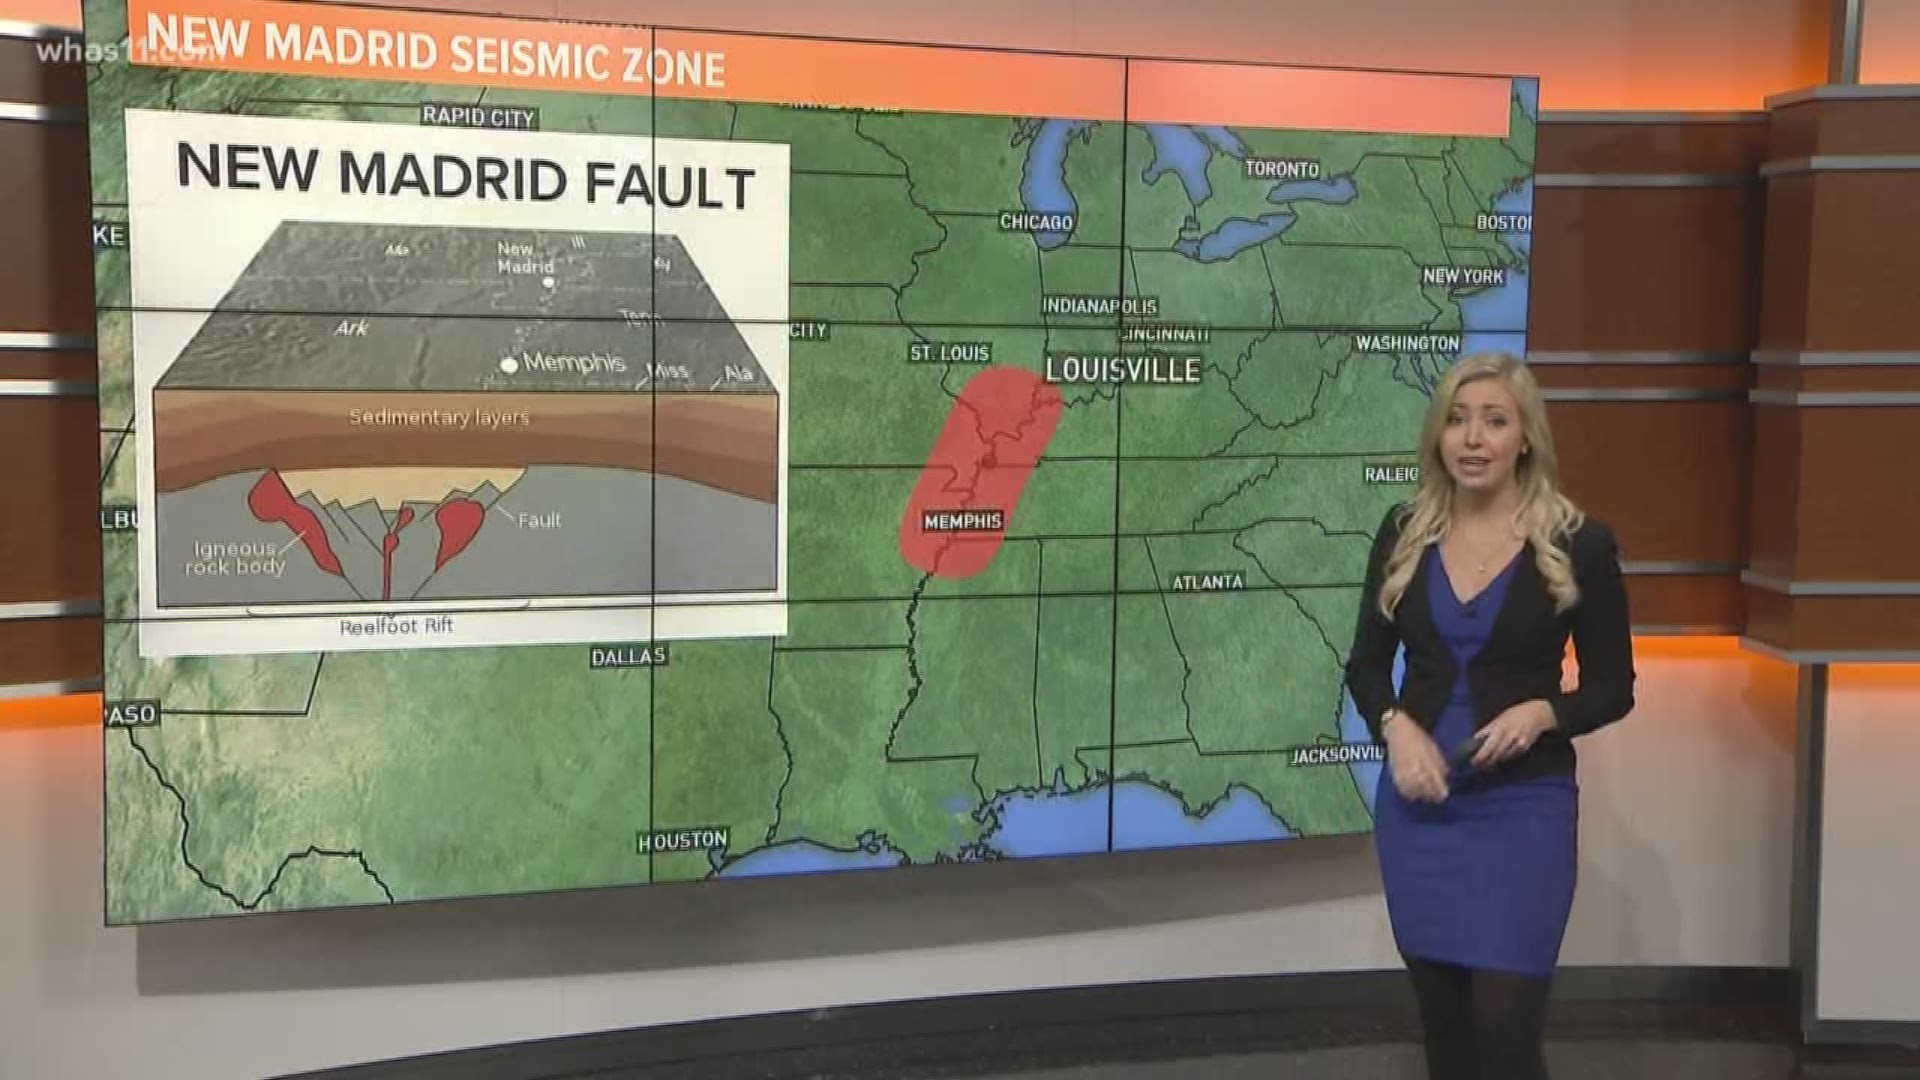 Earthquakes can happen at any time and they're nearly impossible to predict. Some residents of Tennessee may have had a shaky start to their morning because an earthquake and aftershock occurred just after 4 a.m. about 10 miles north of Decatur, Tenn.